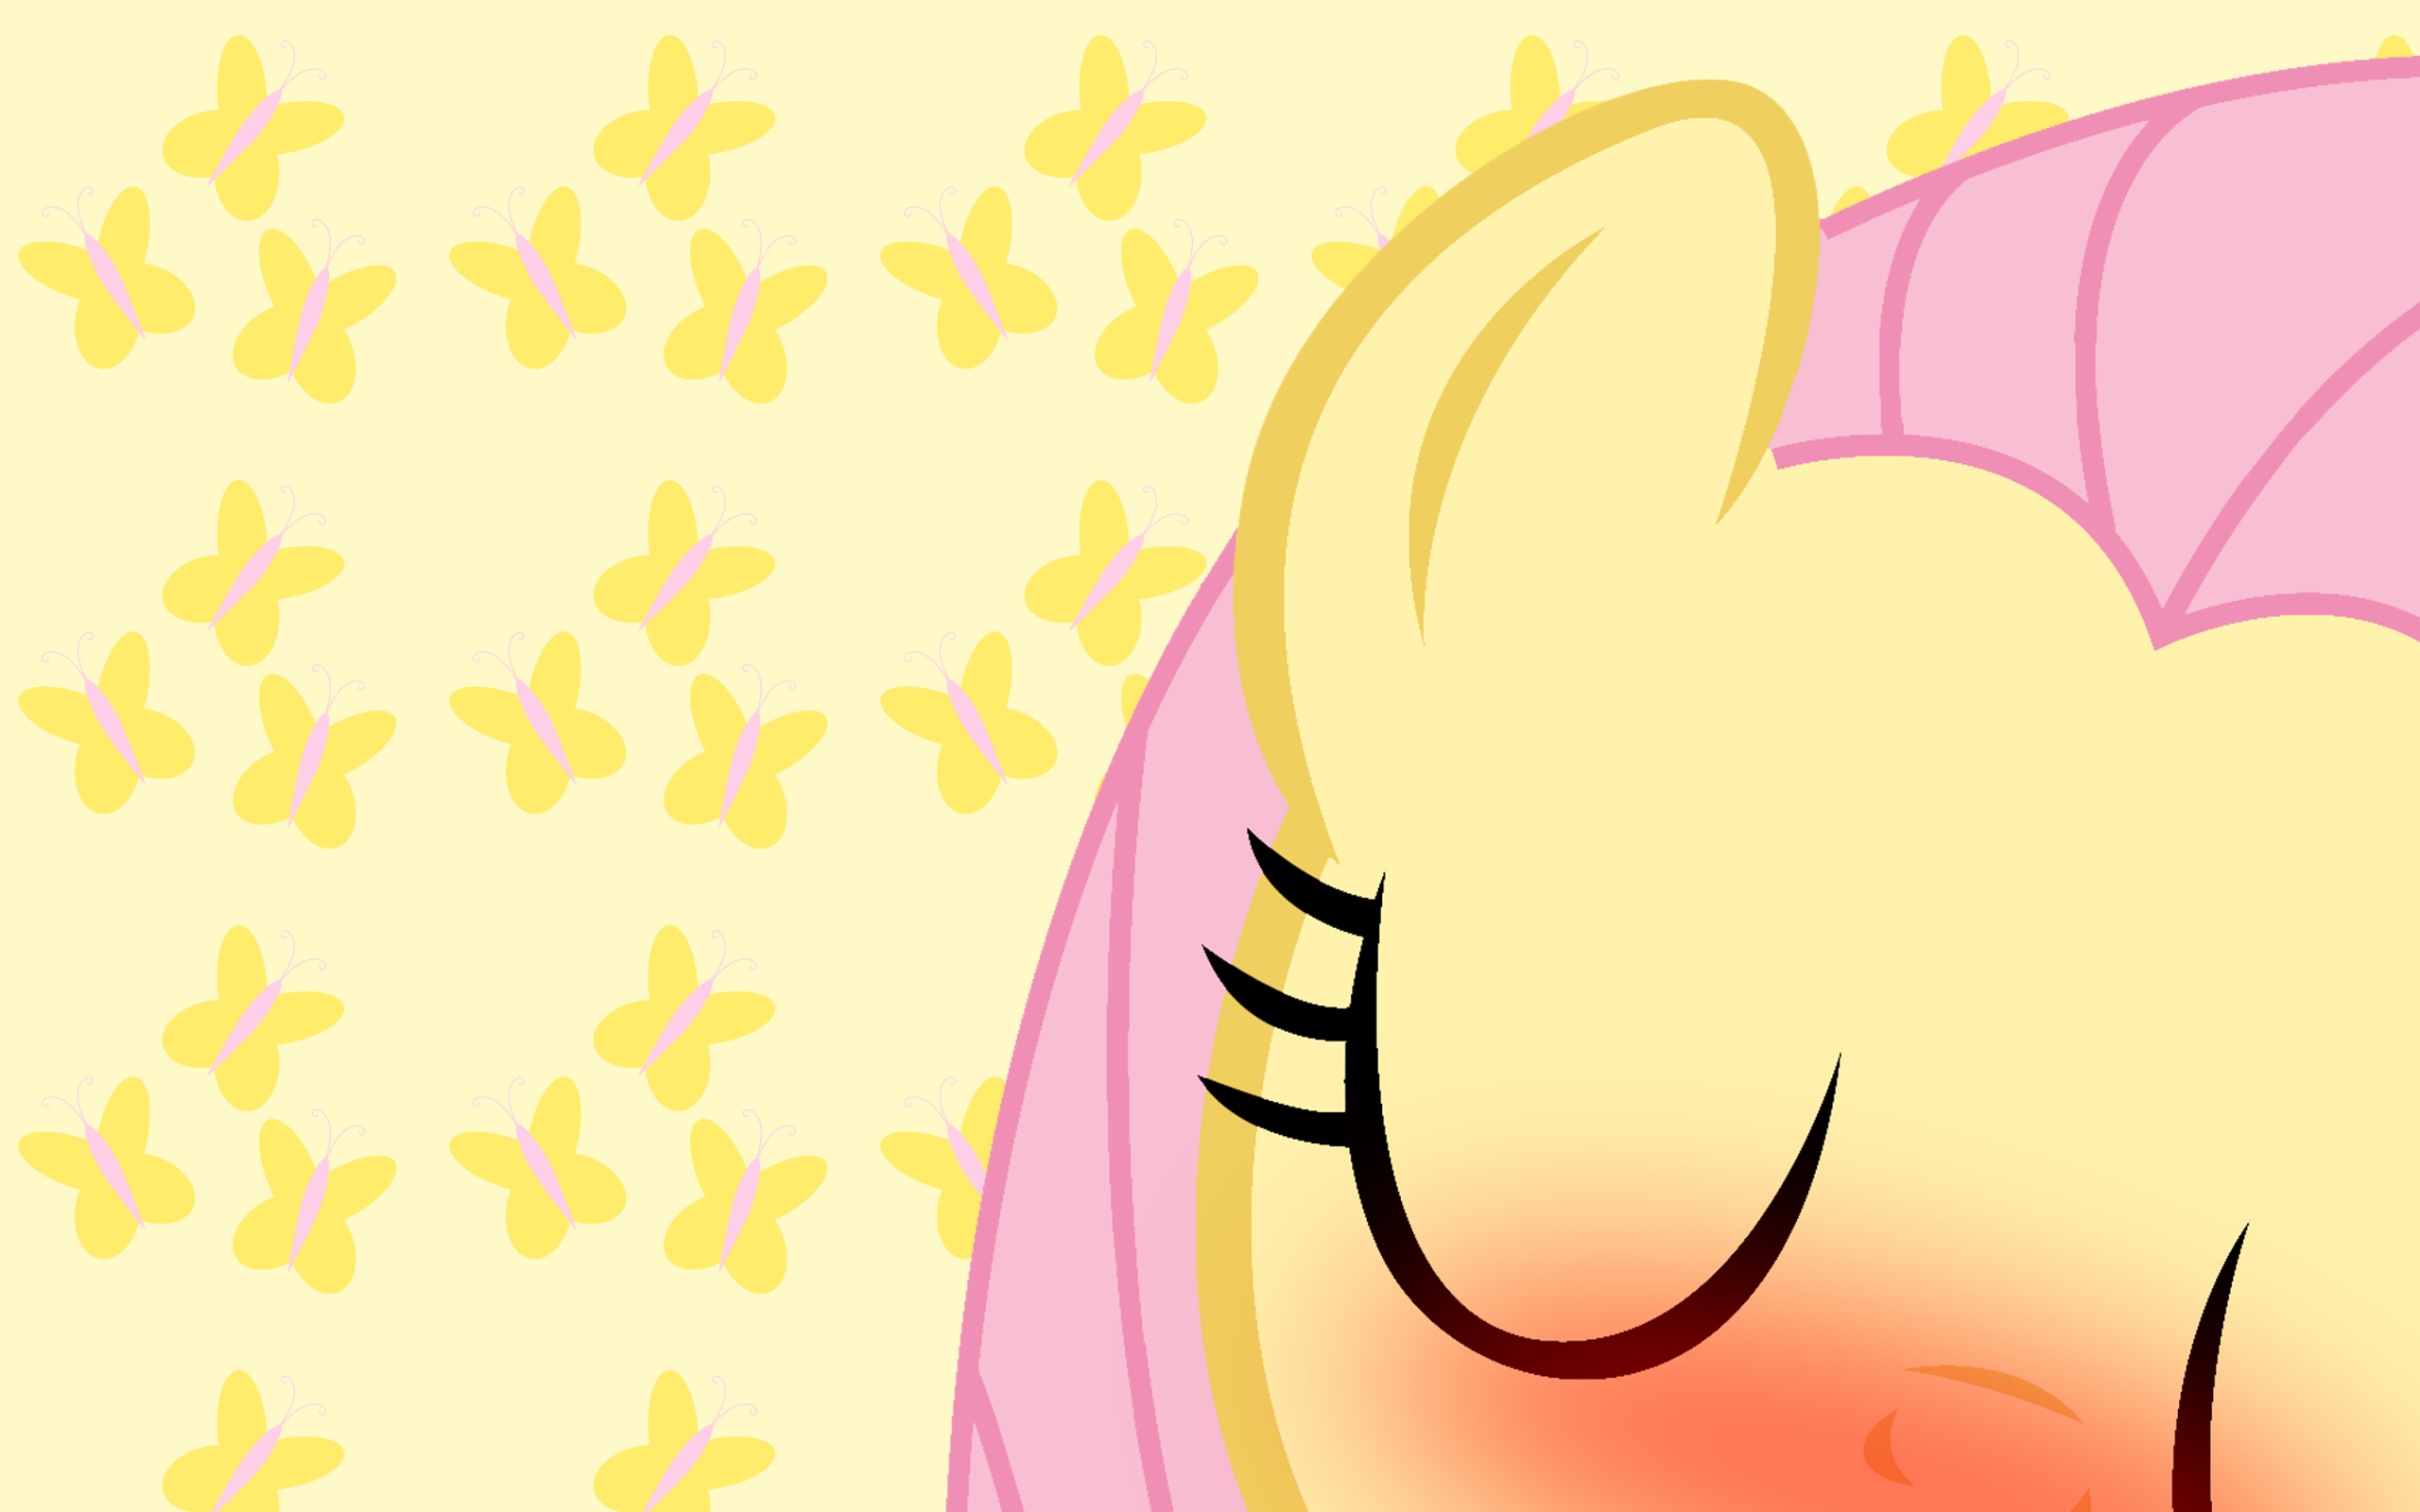 Be My Special Some pony Fluttershy WP by AliceHumanSacrifice0, ooklah and ShadyHorseman